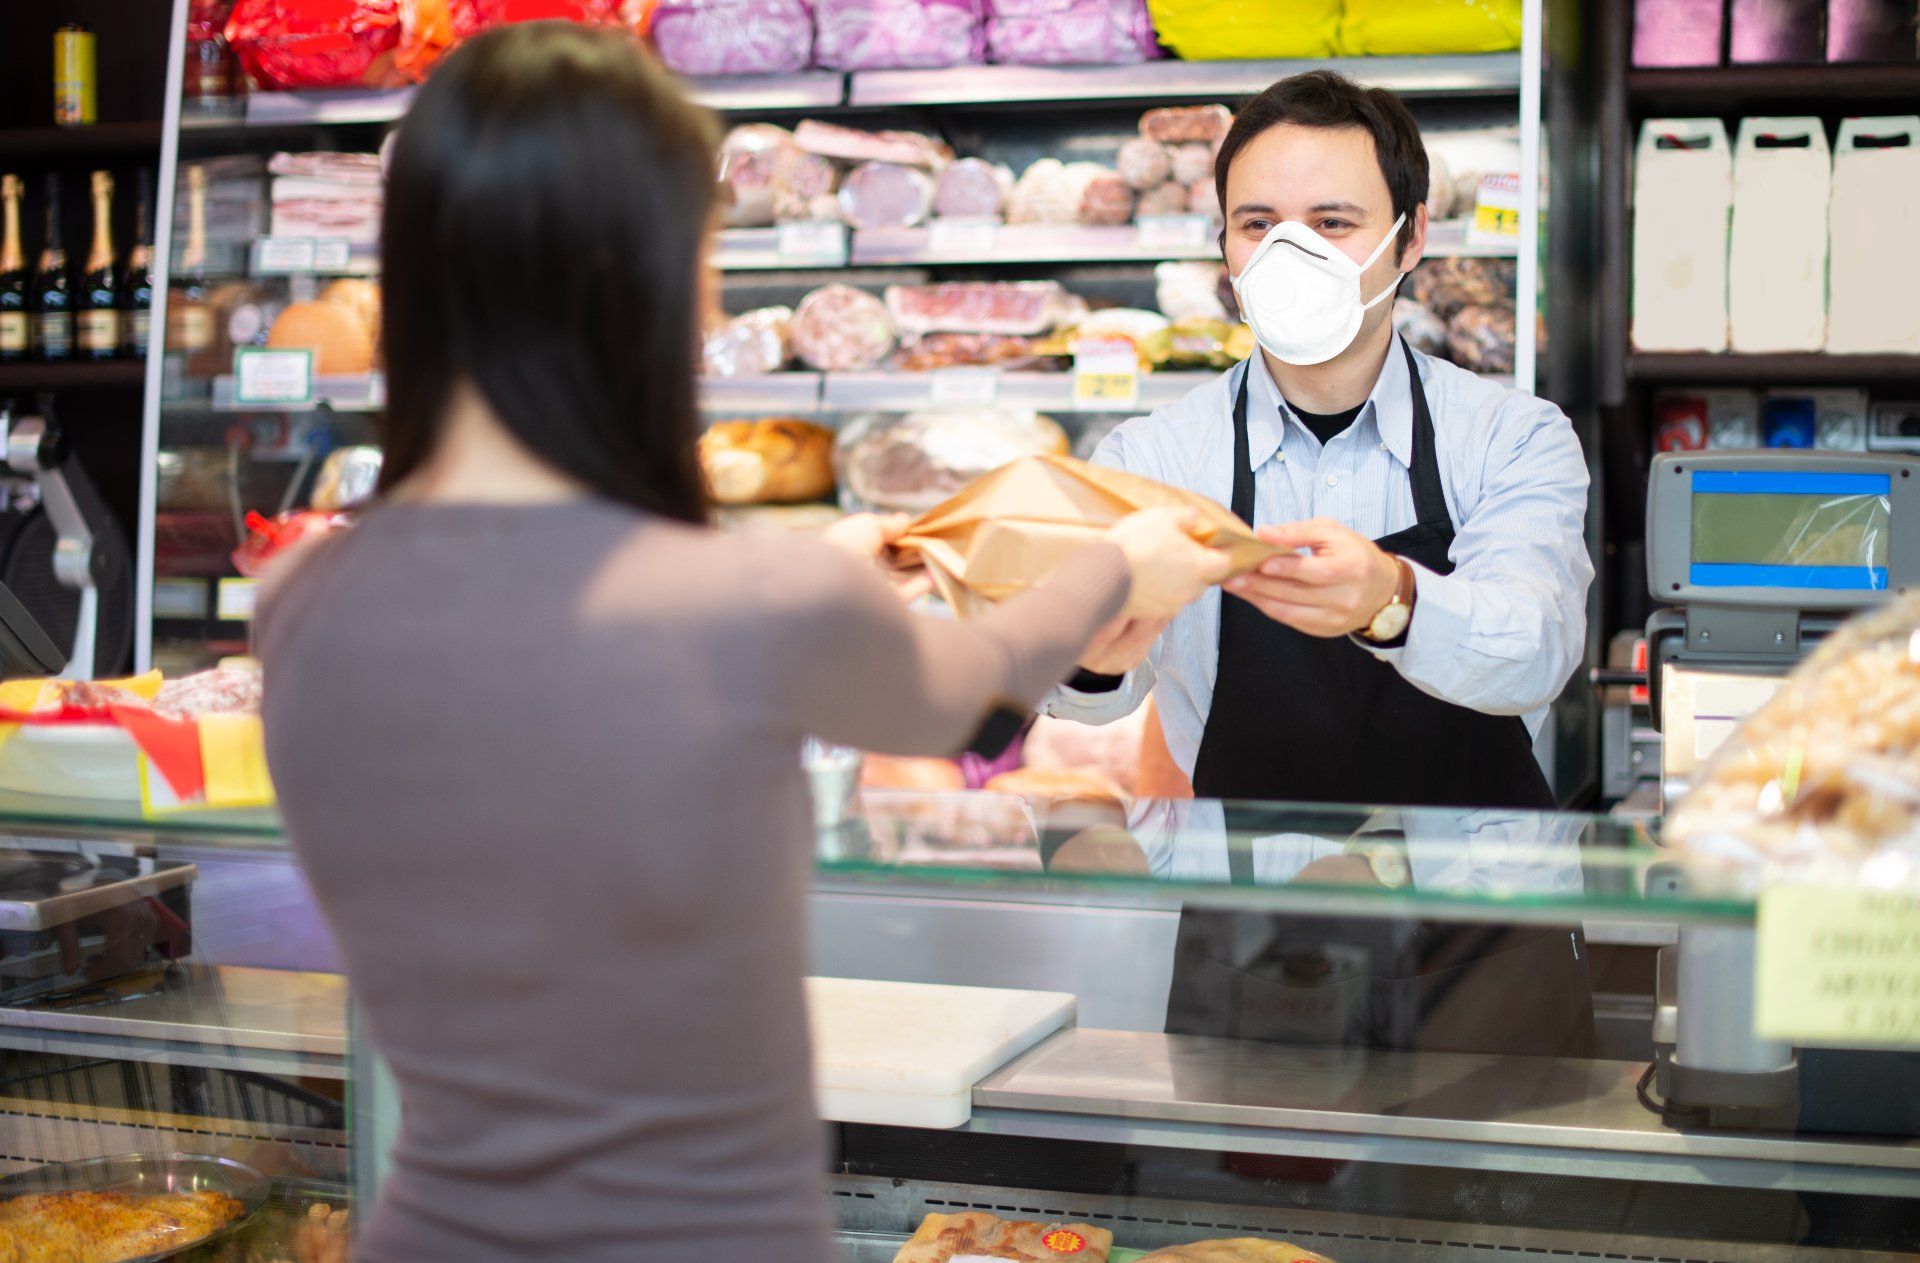 A deli counter worker wearing a surgical mask hands a woman her purchase - employee safety